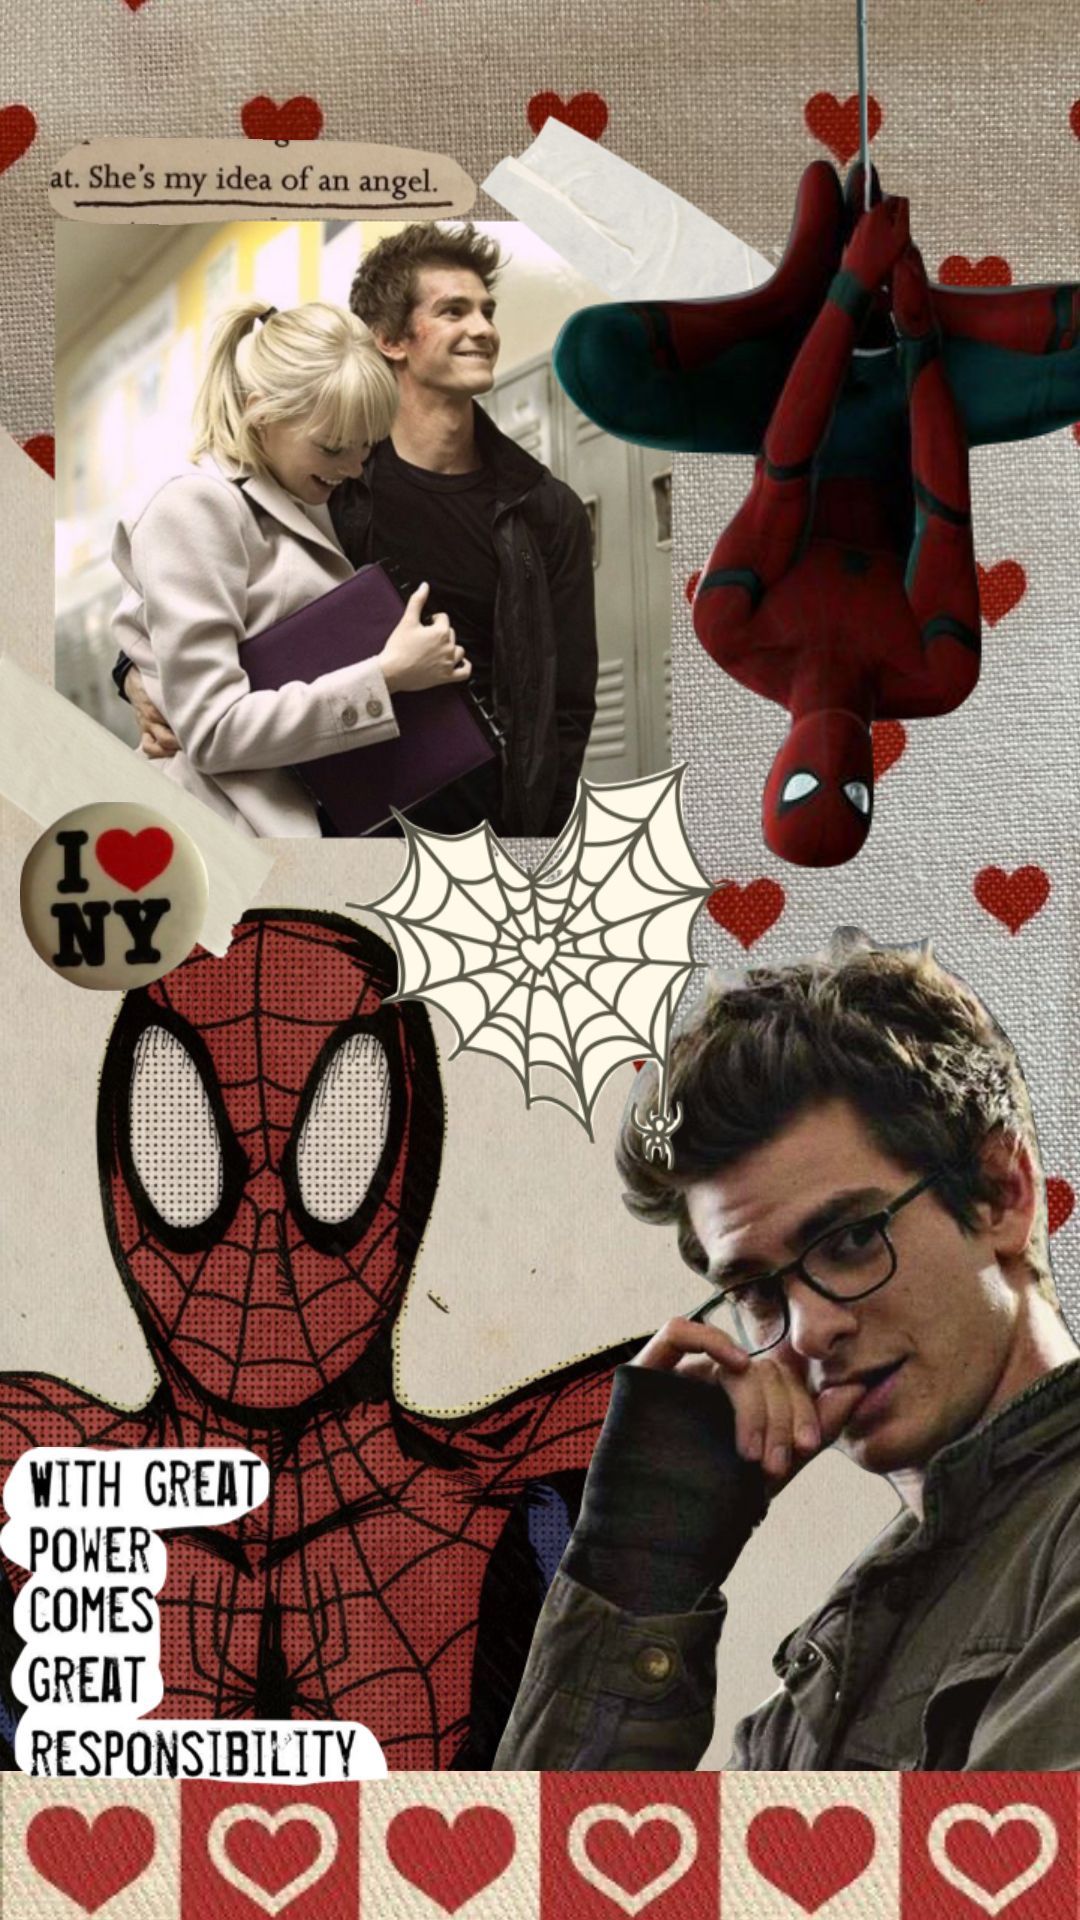 spiderman #andrewgarfield #marvel #aesthetic #moodboard #collage. Andrew garfield, Spiderman, I ❤ ny